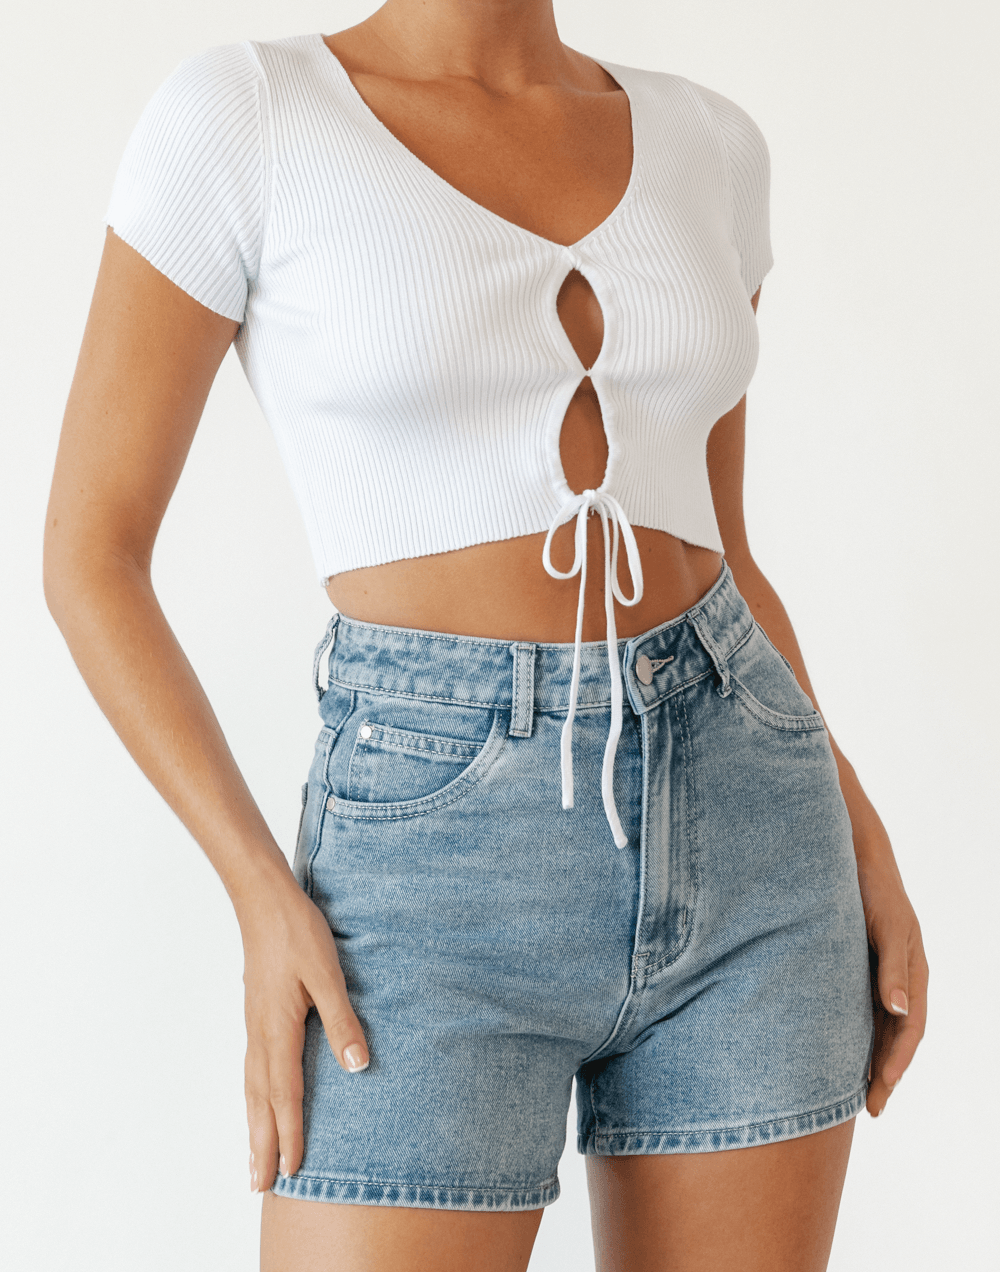 Barna Knit Crop Top (White) - Knitted White Crop Top - Women's Top - Charcoal Clothing